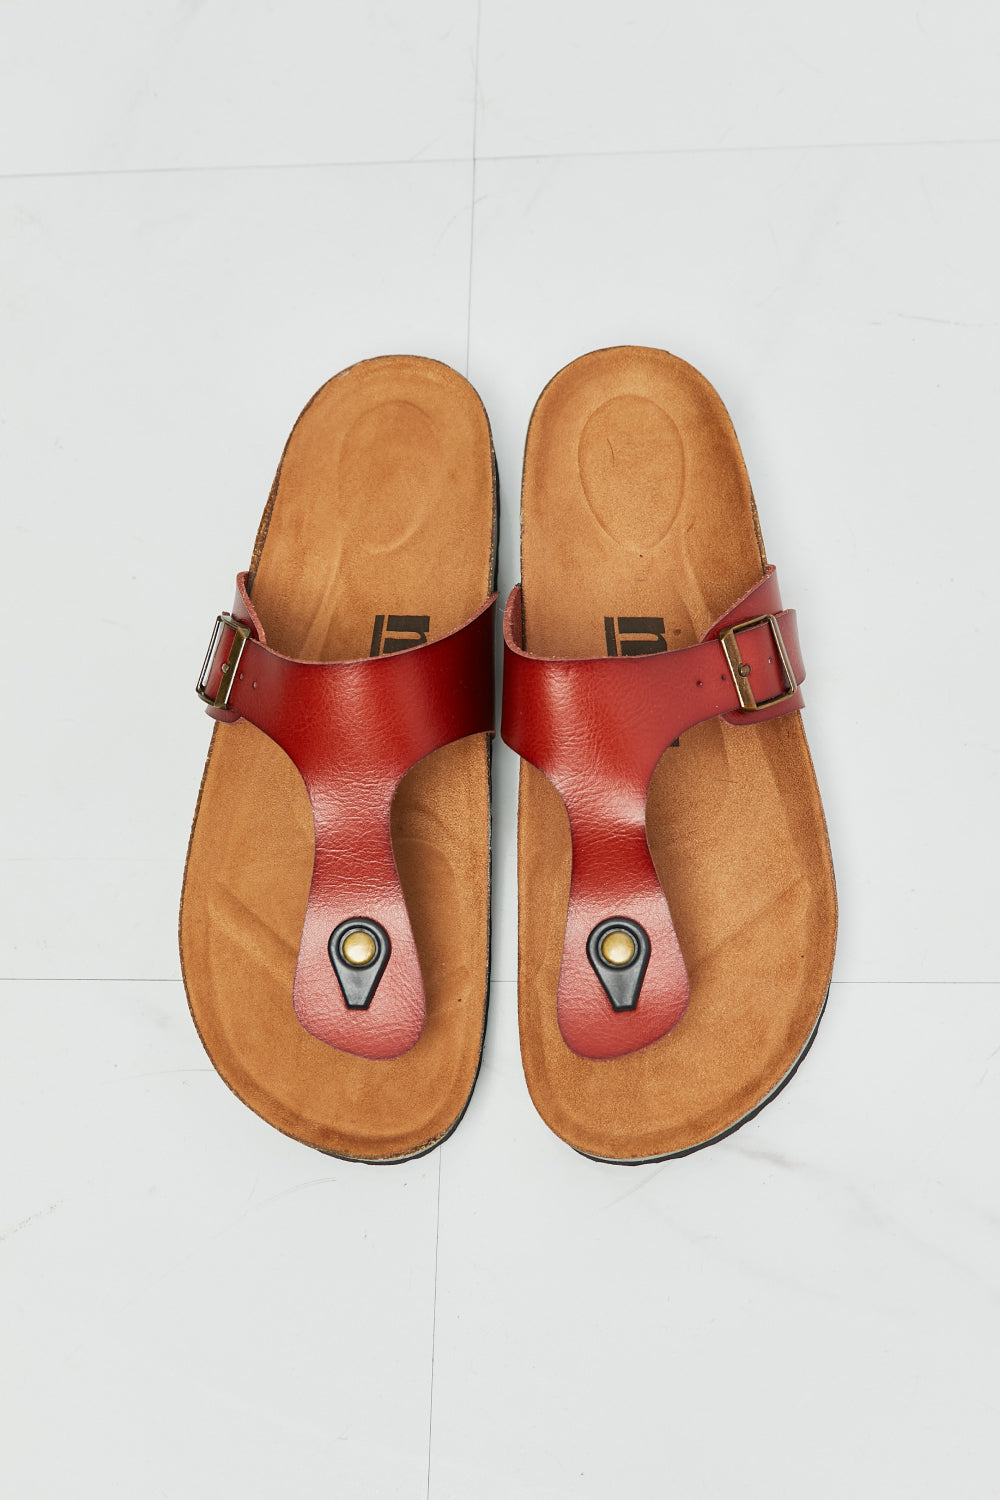 MMShoes Drift Away T-Strap Flip-Flop in Red Sandals